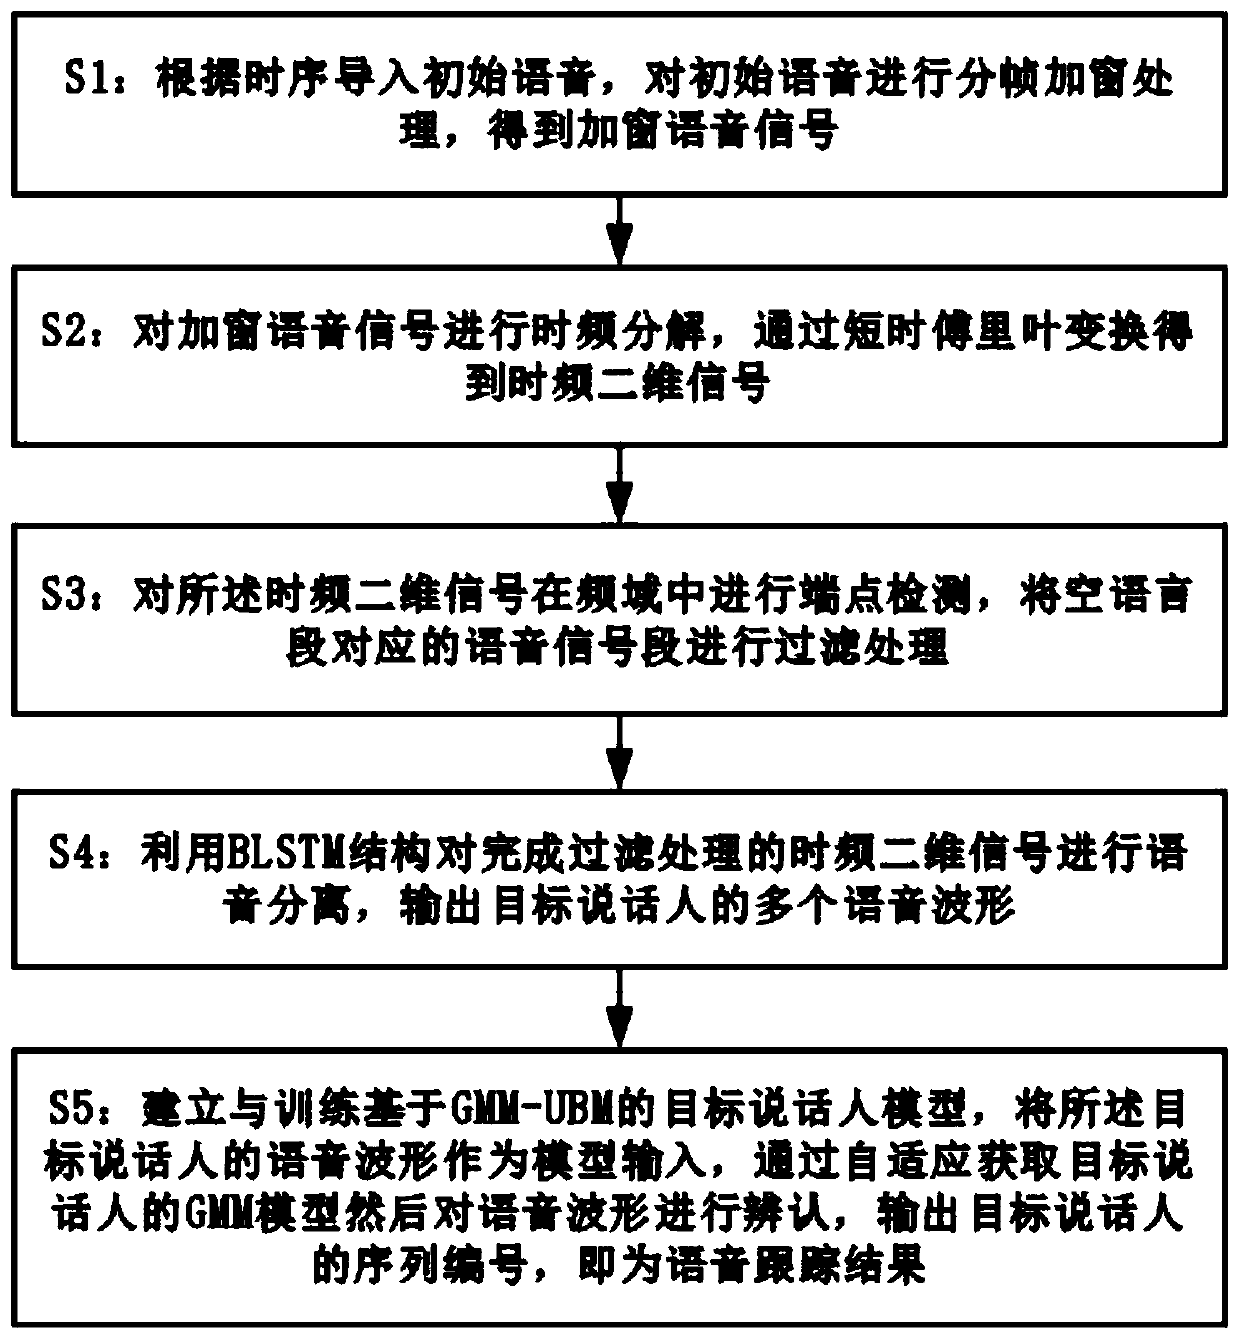 Speech separation and tracking method for public security criminal investigation and monitoring